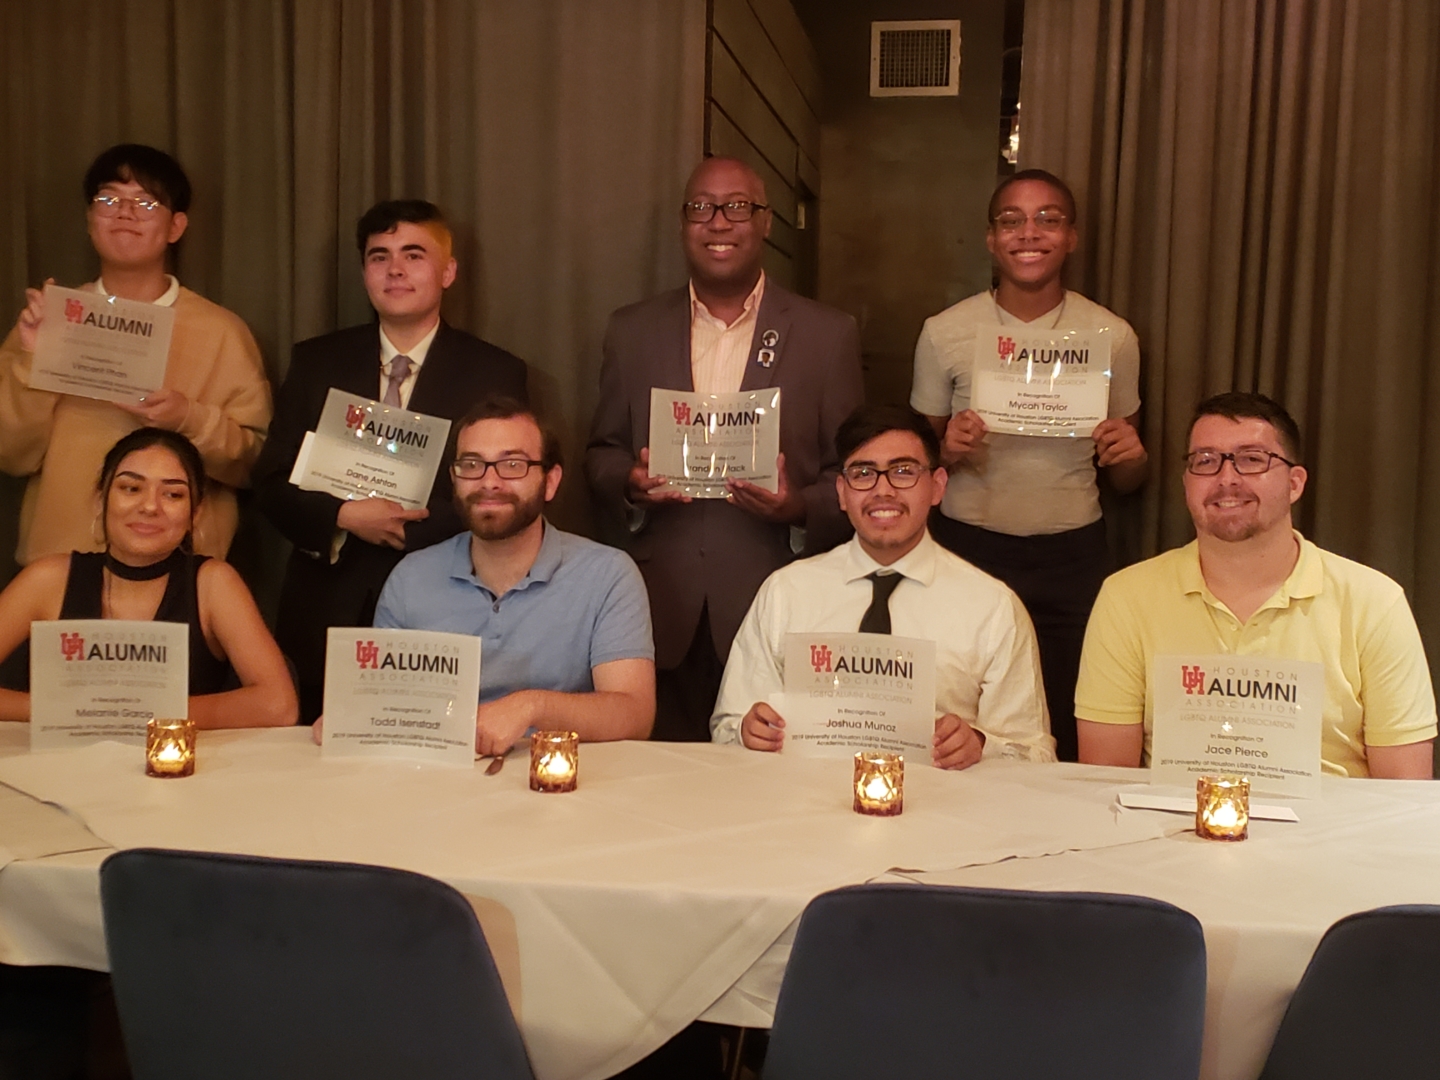 The UH LGBTQ Alumni Association awarded over $16,000 in scholarships to LGBTQ students | Photo courtesy of Jenna Pel, UH LGBTQ Alumni Association